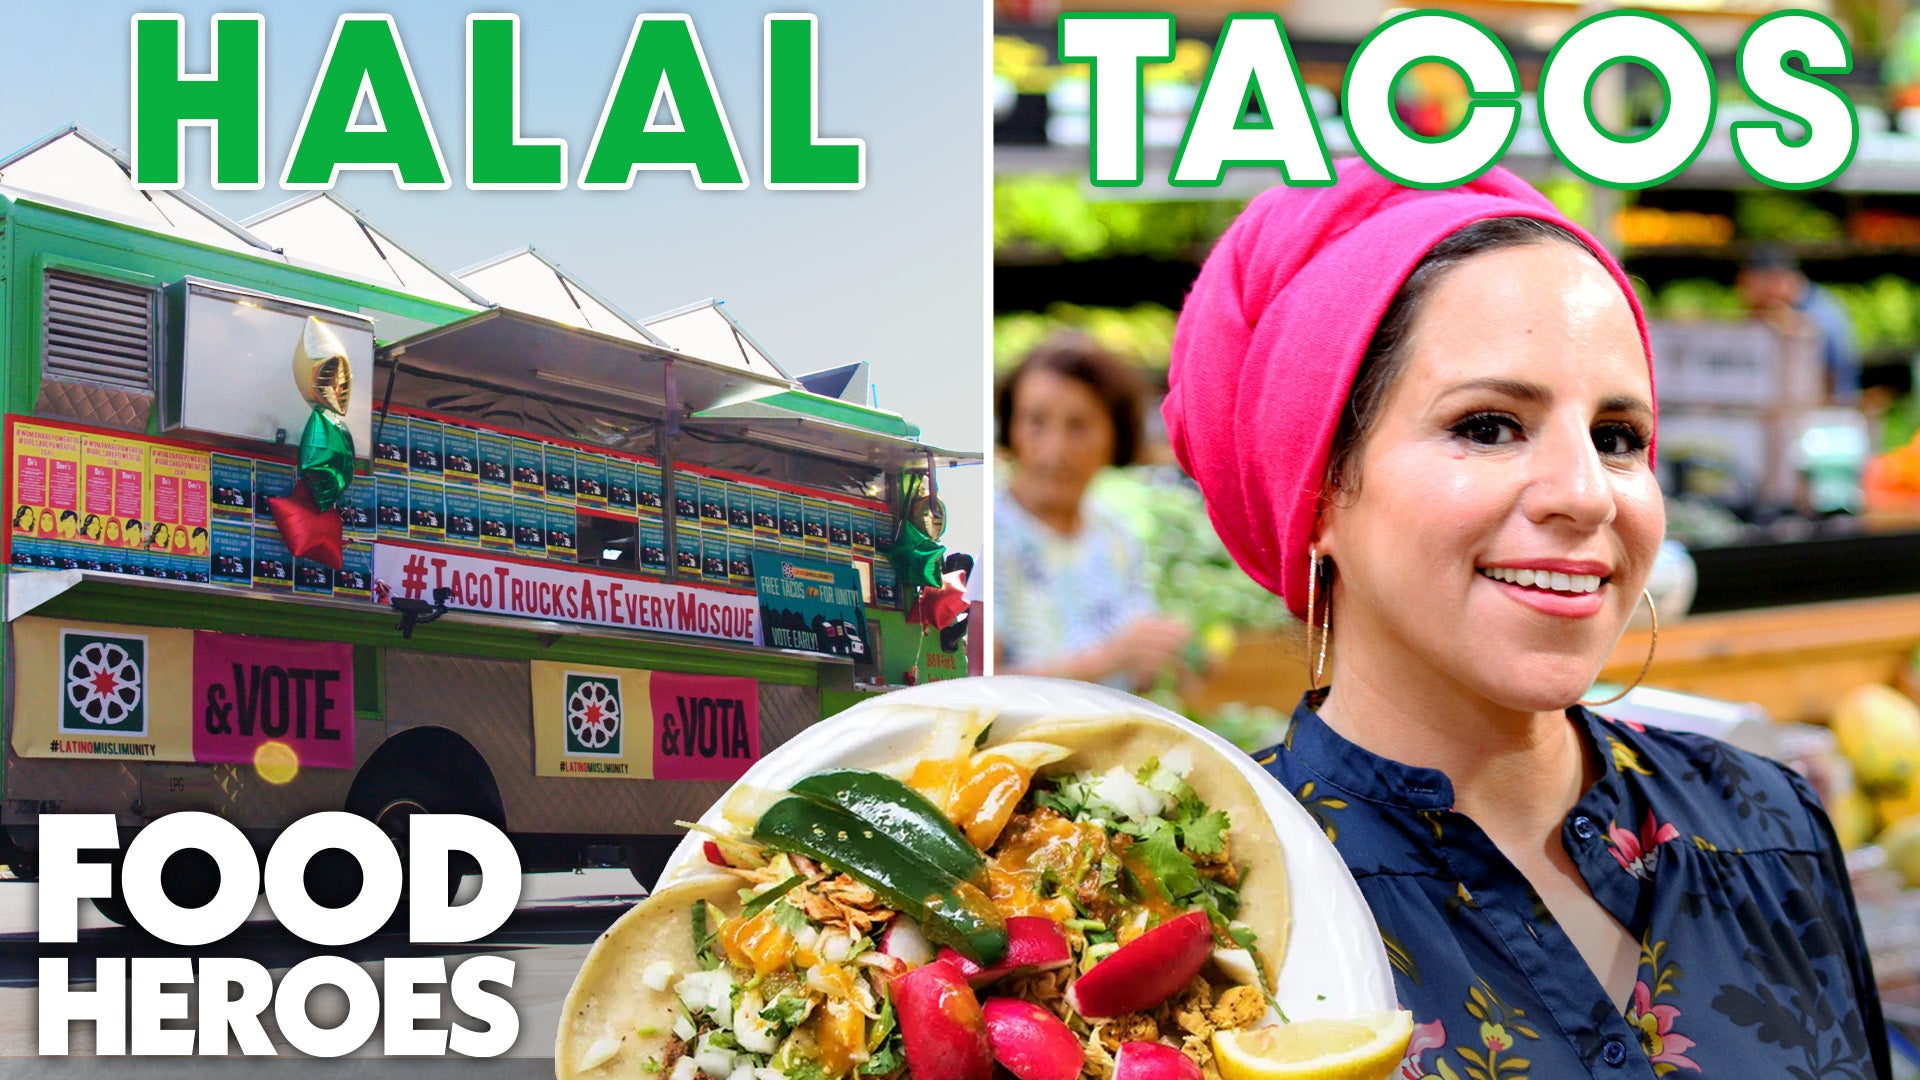 The Halal Taco Truck Uniting Muslim and Latino Communities